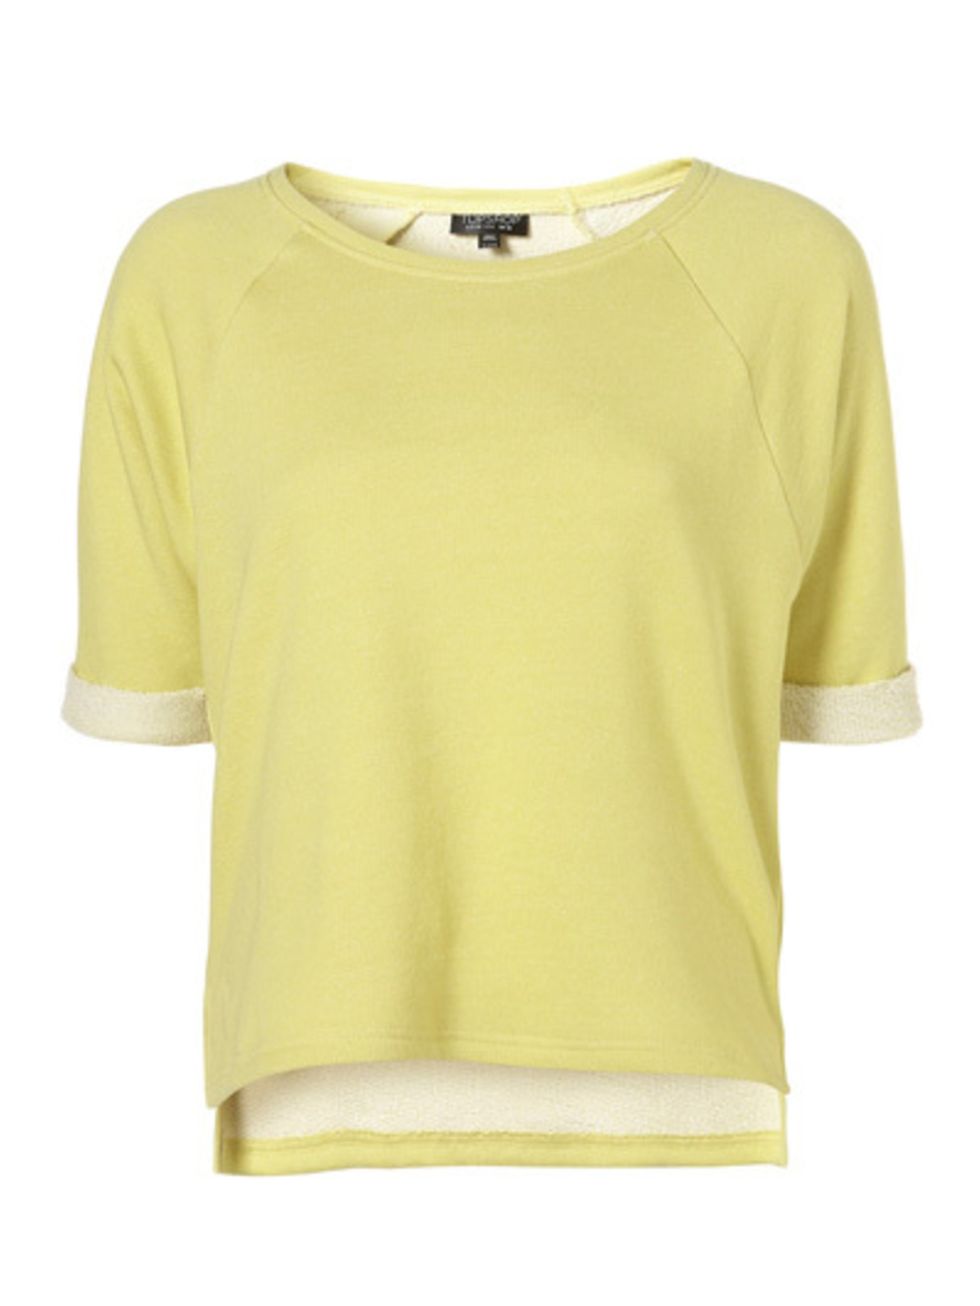 Clothing, Product, Green, Yellow, Sleeve, White, Teal, Aqua, Active shirt, Top, 